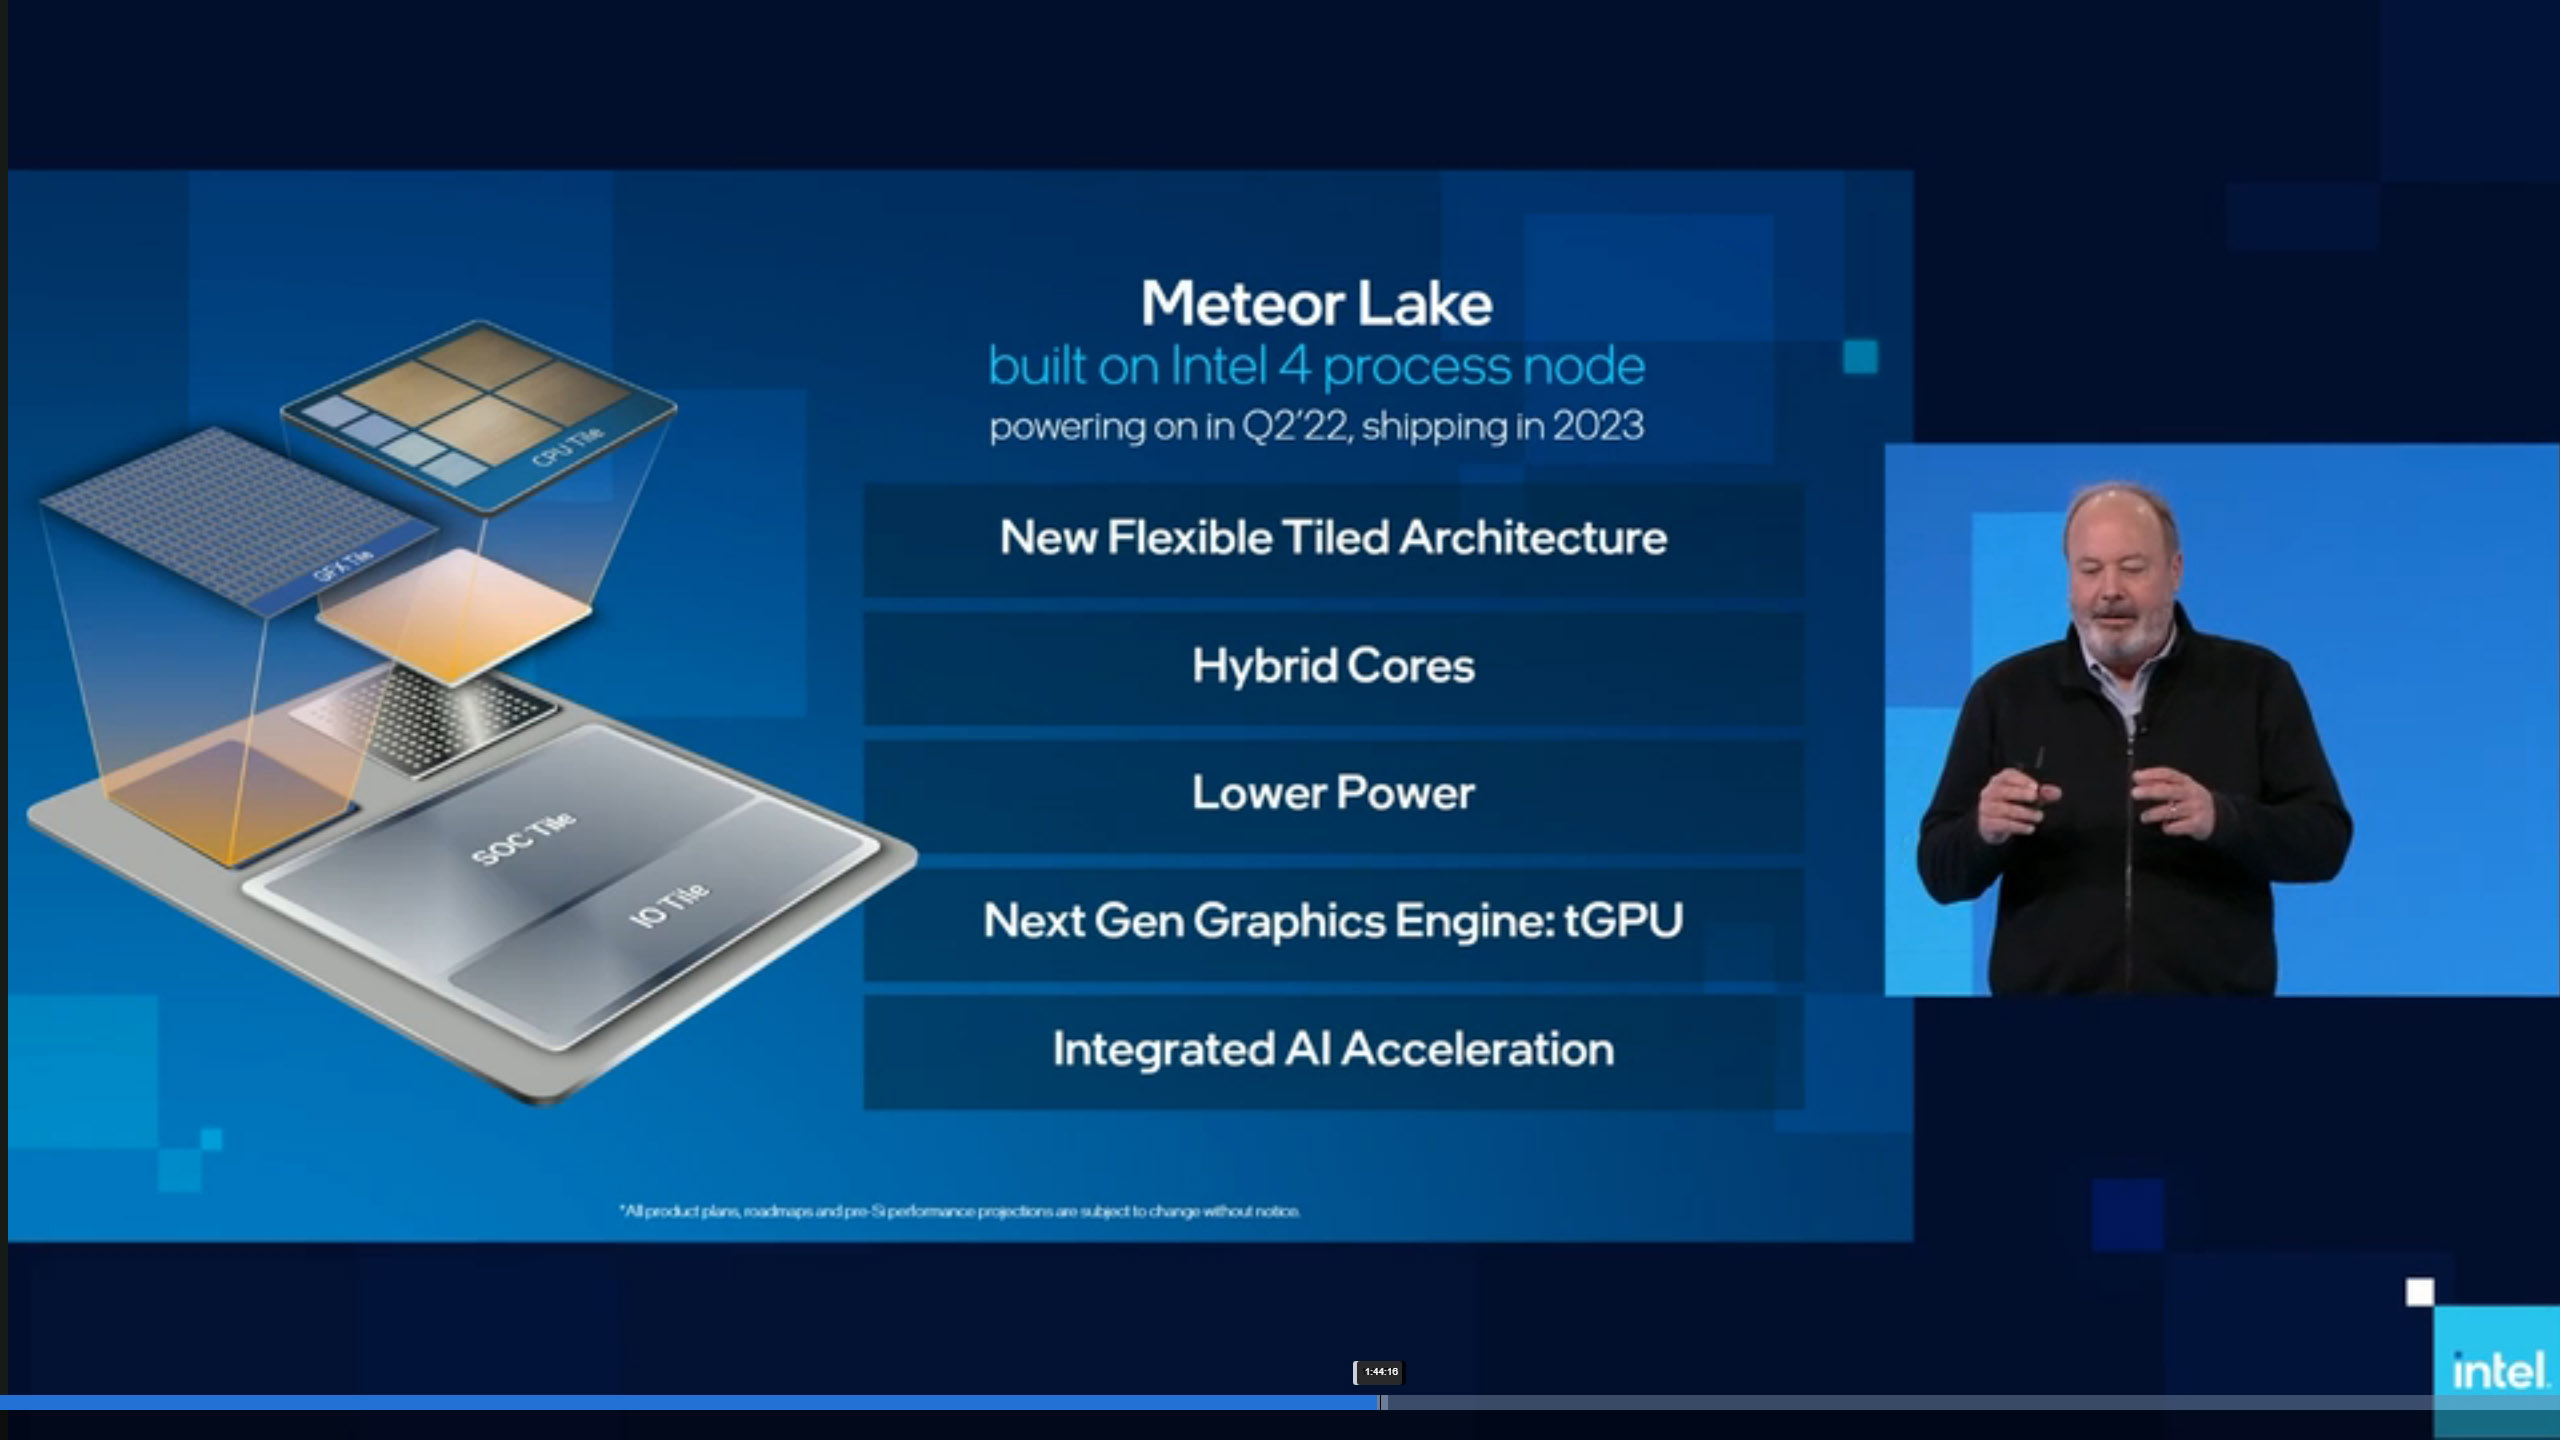 Intel provides details on its Meteor Lake CPU architecture